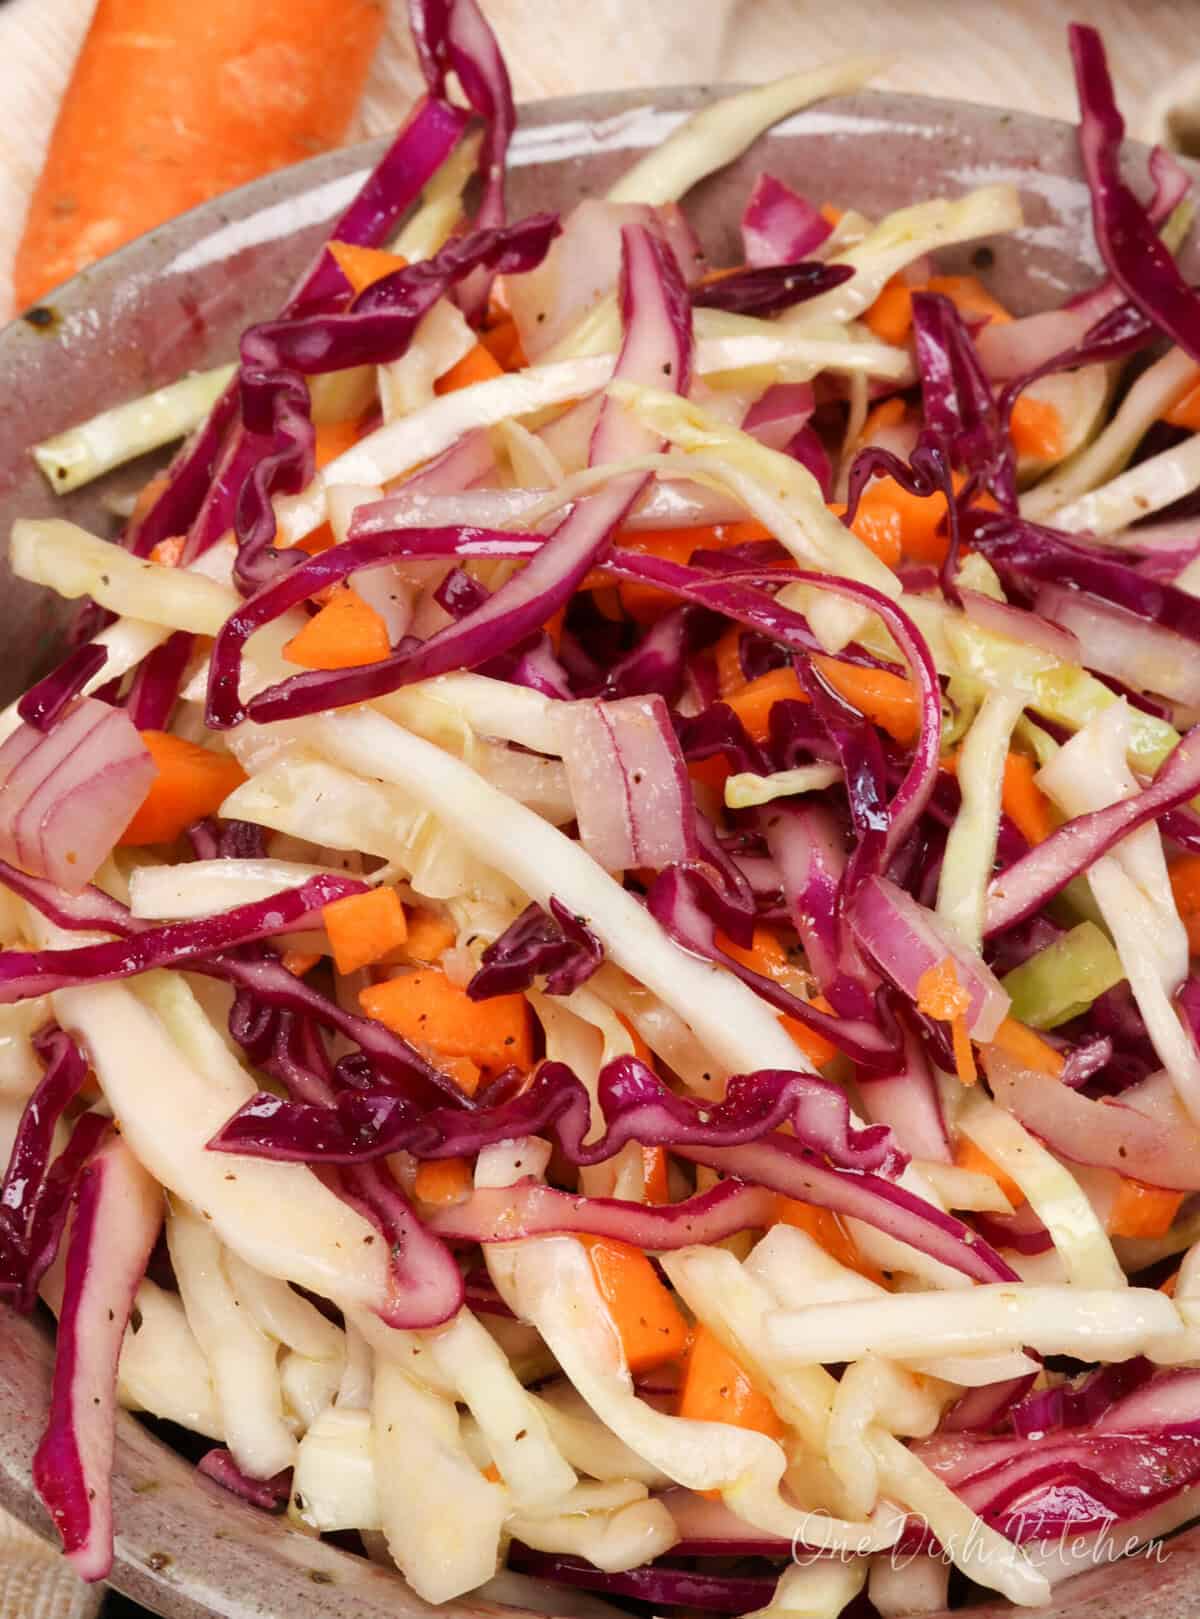 a closeup picture of a bowl of coleslaw in a vinegar based dressing.